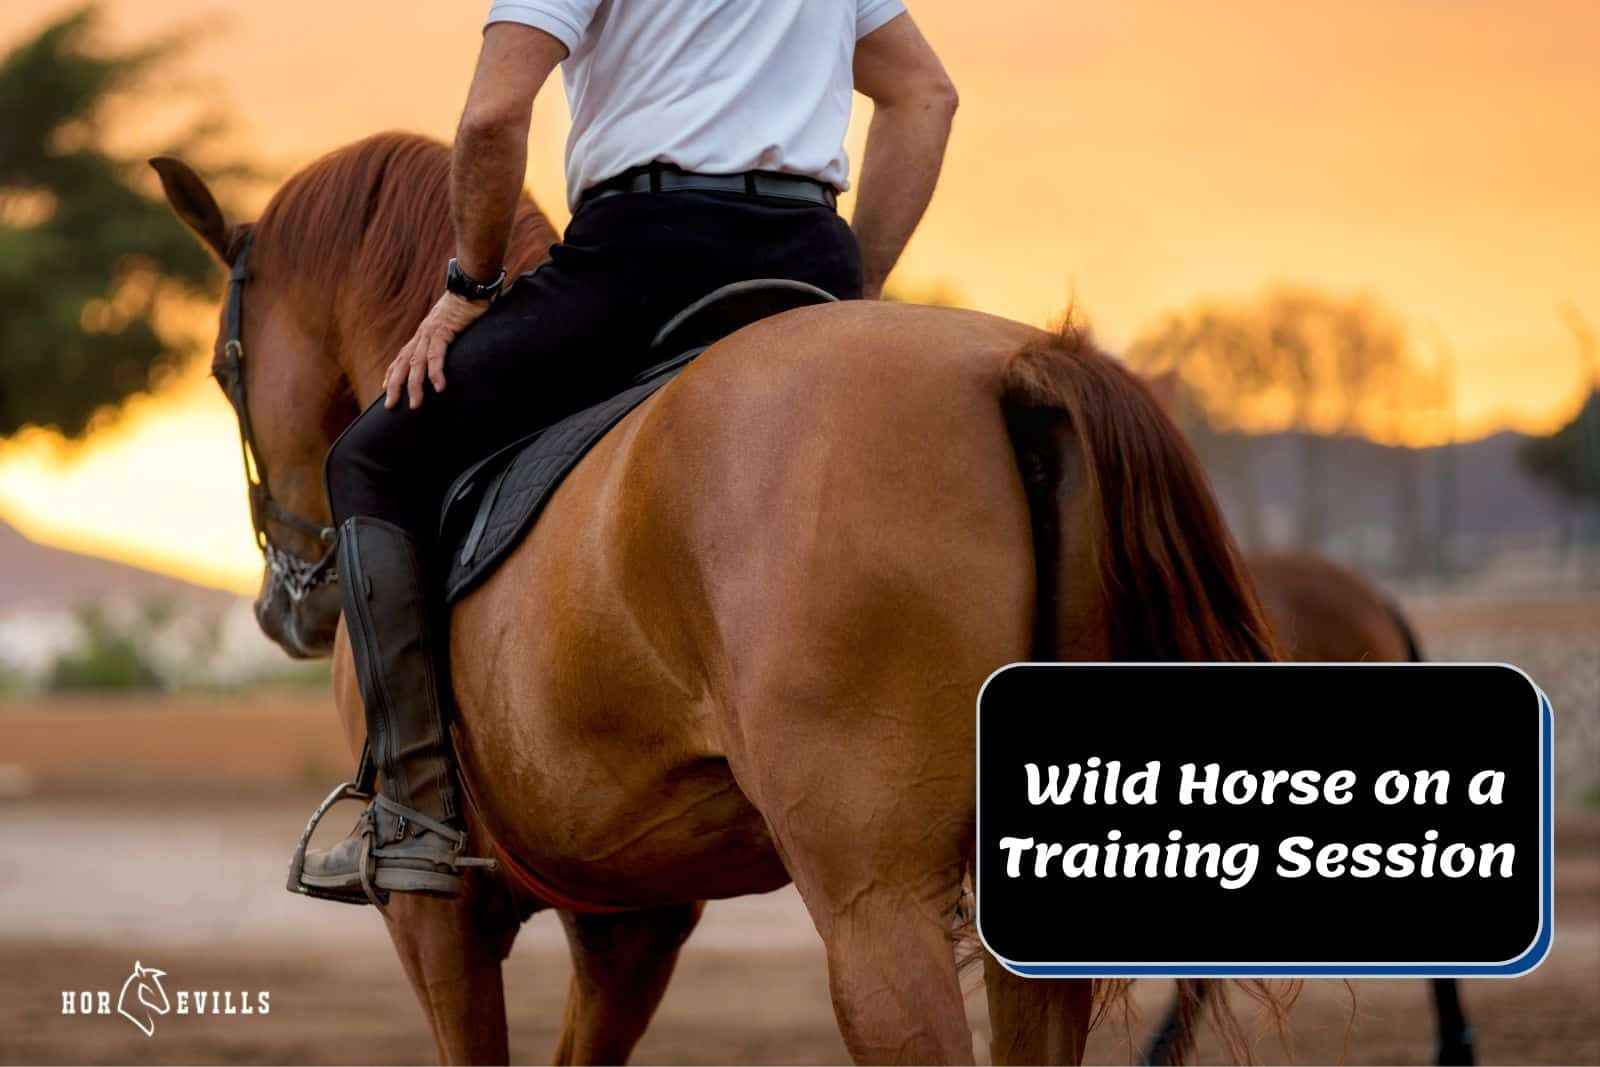 Wild Horse on a Training Session